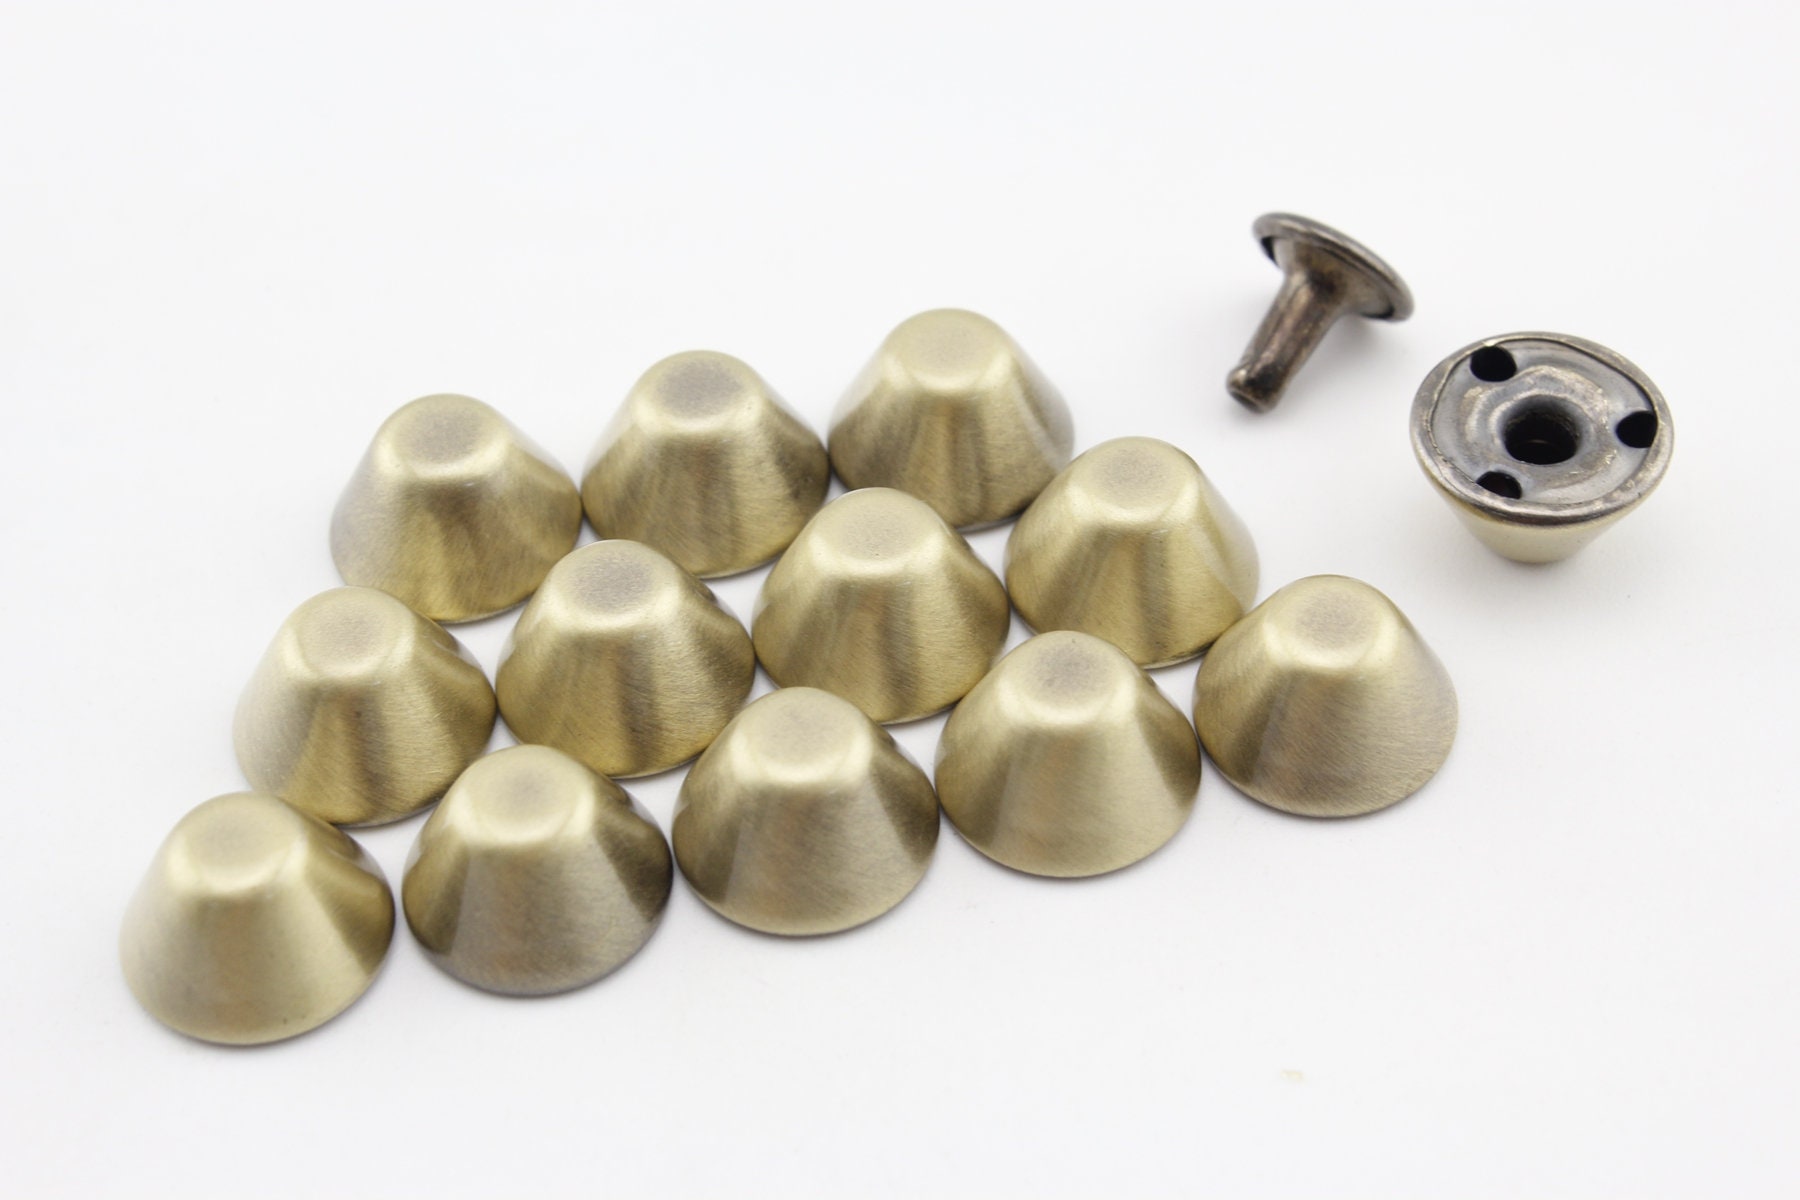 15mm Purse Feet in Nickel Finish with Washers – Tantalizing Stitches